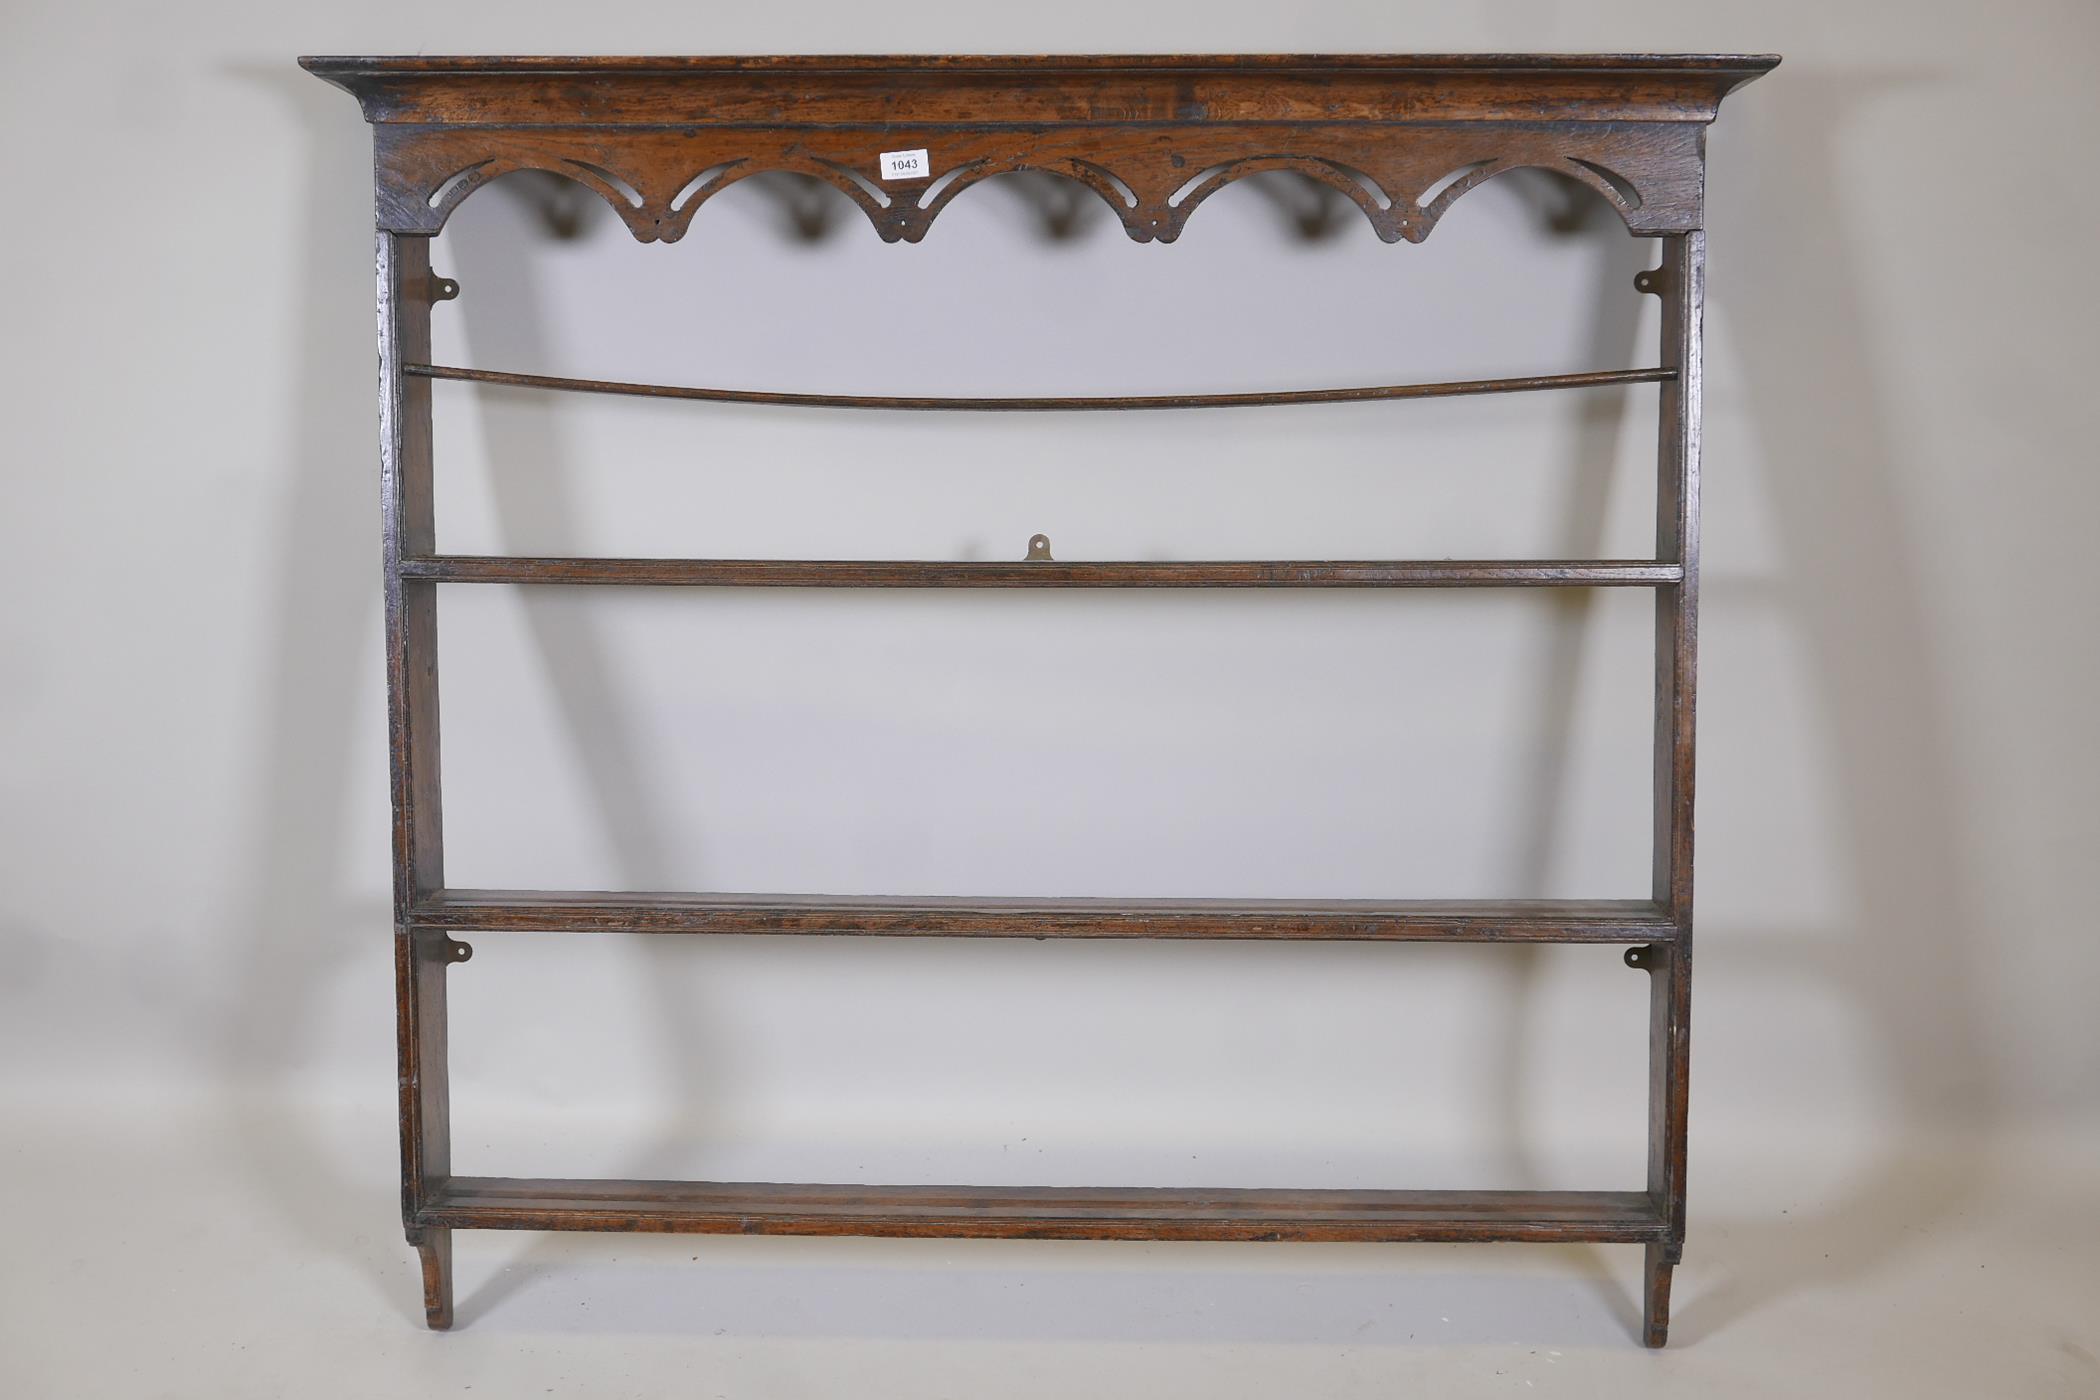 A late C19th/early C20th elm hanging Delft rack, with pierced and shaped frieze and three shelves,